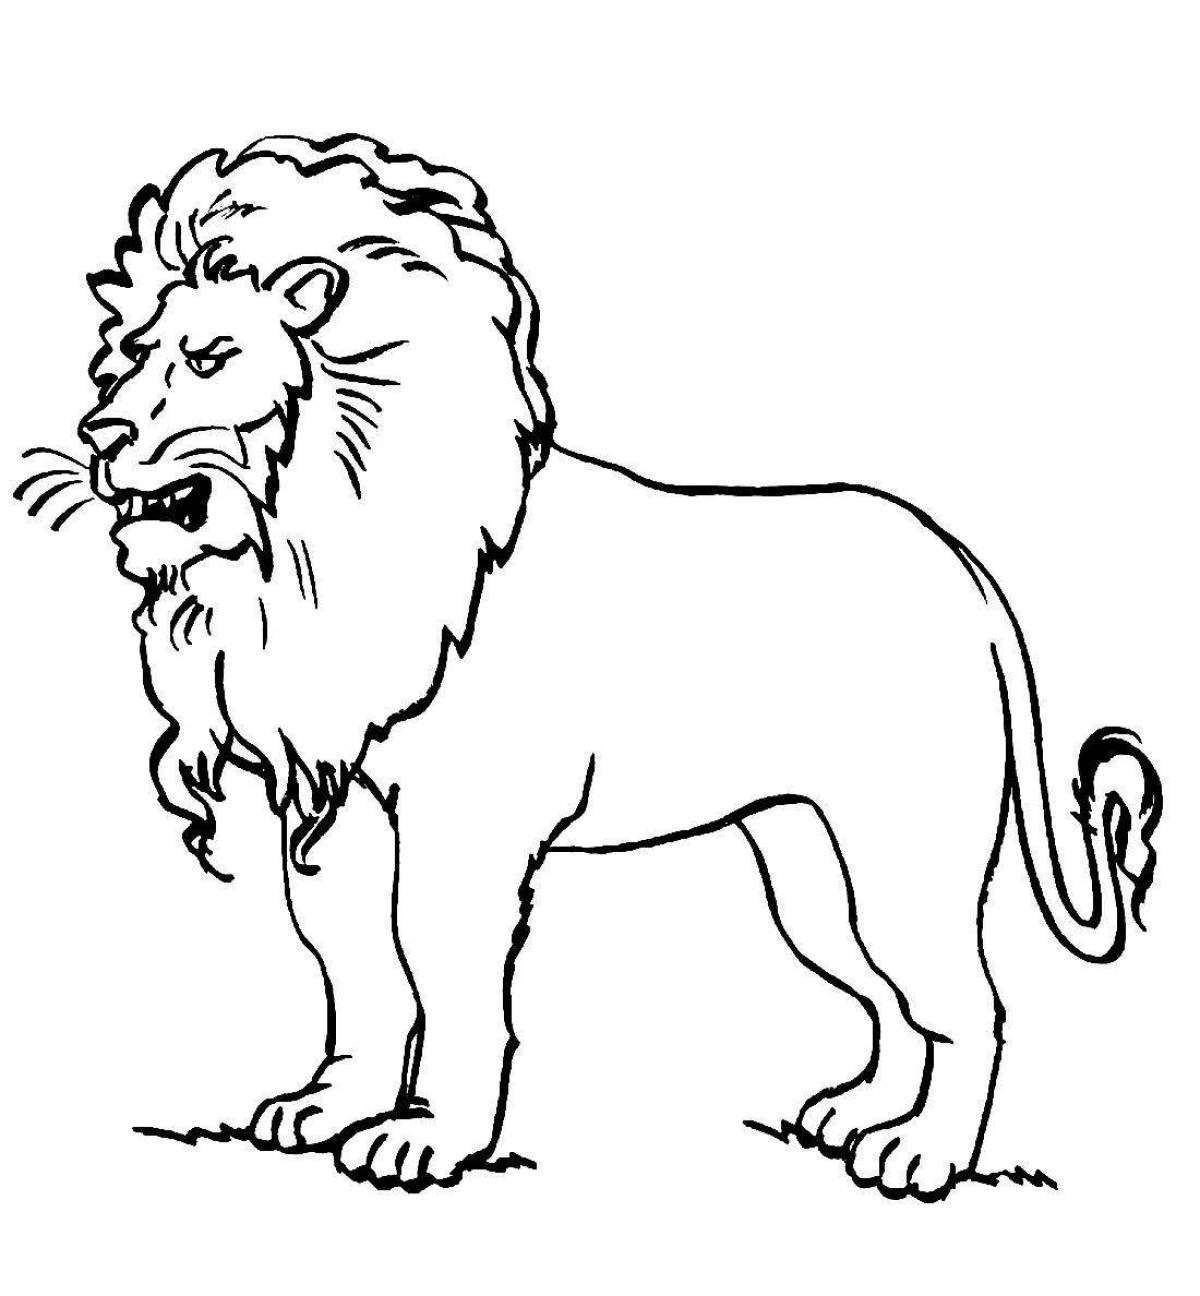 Coloring book cheeky lion